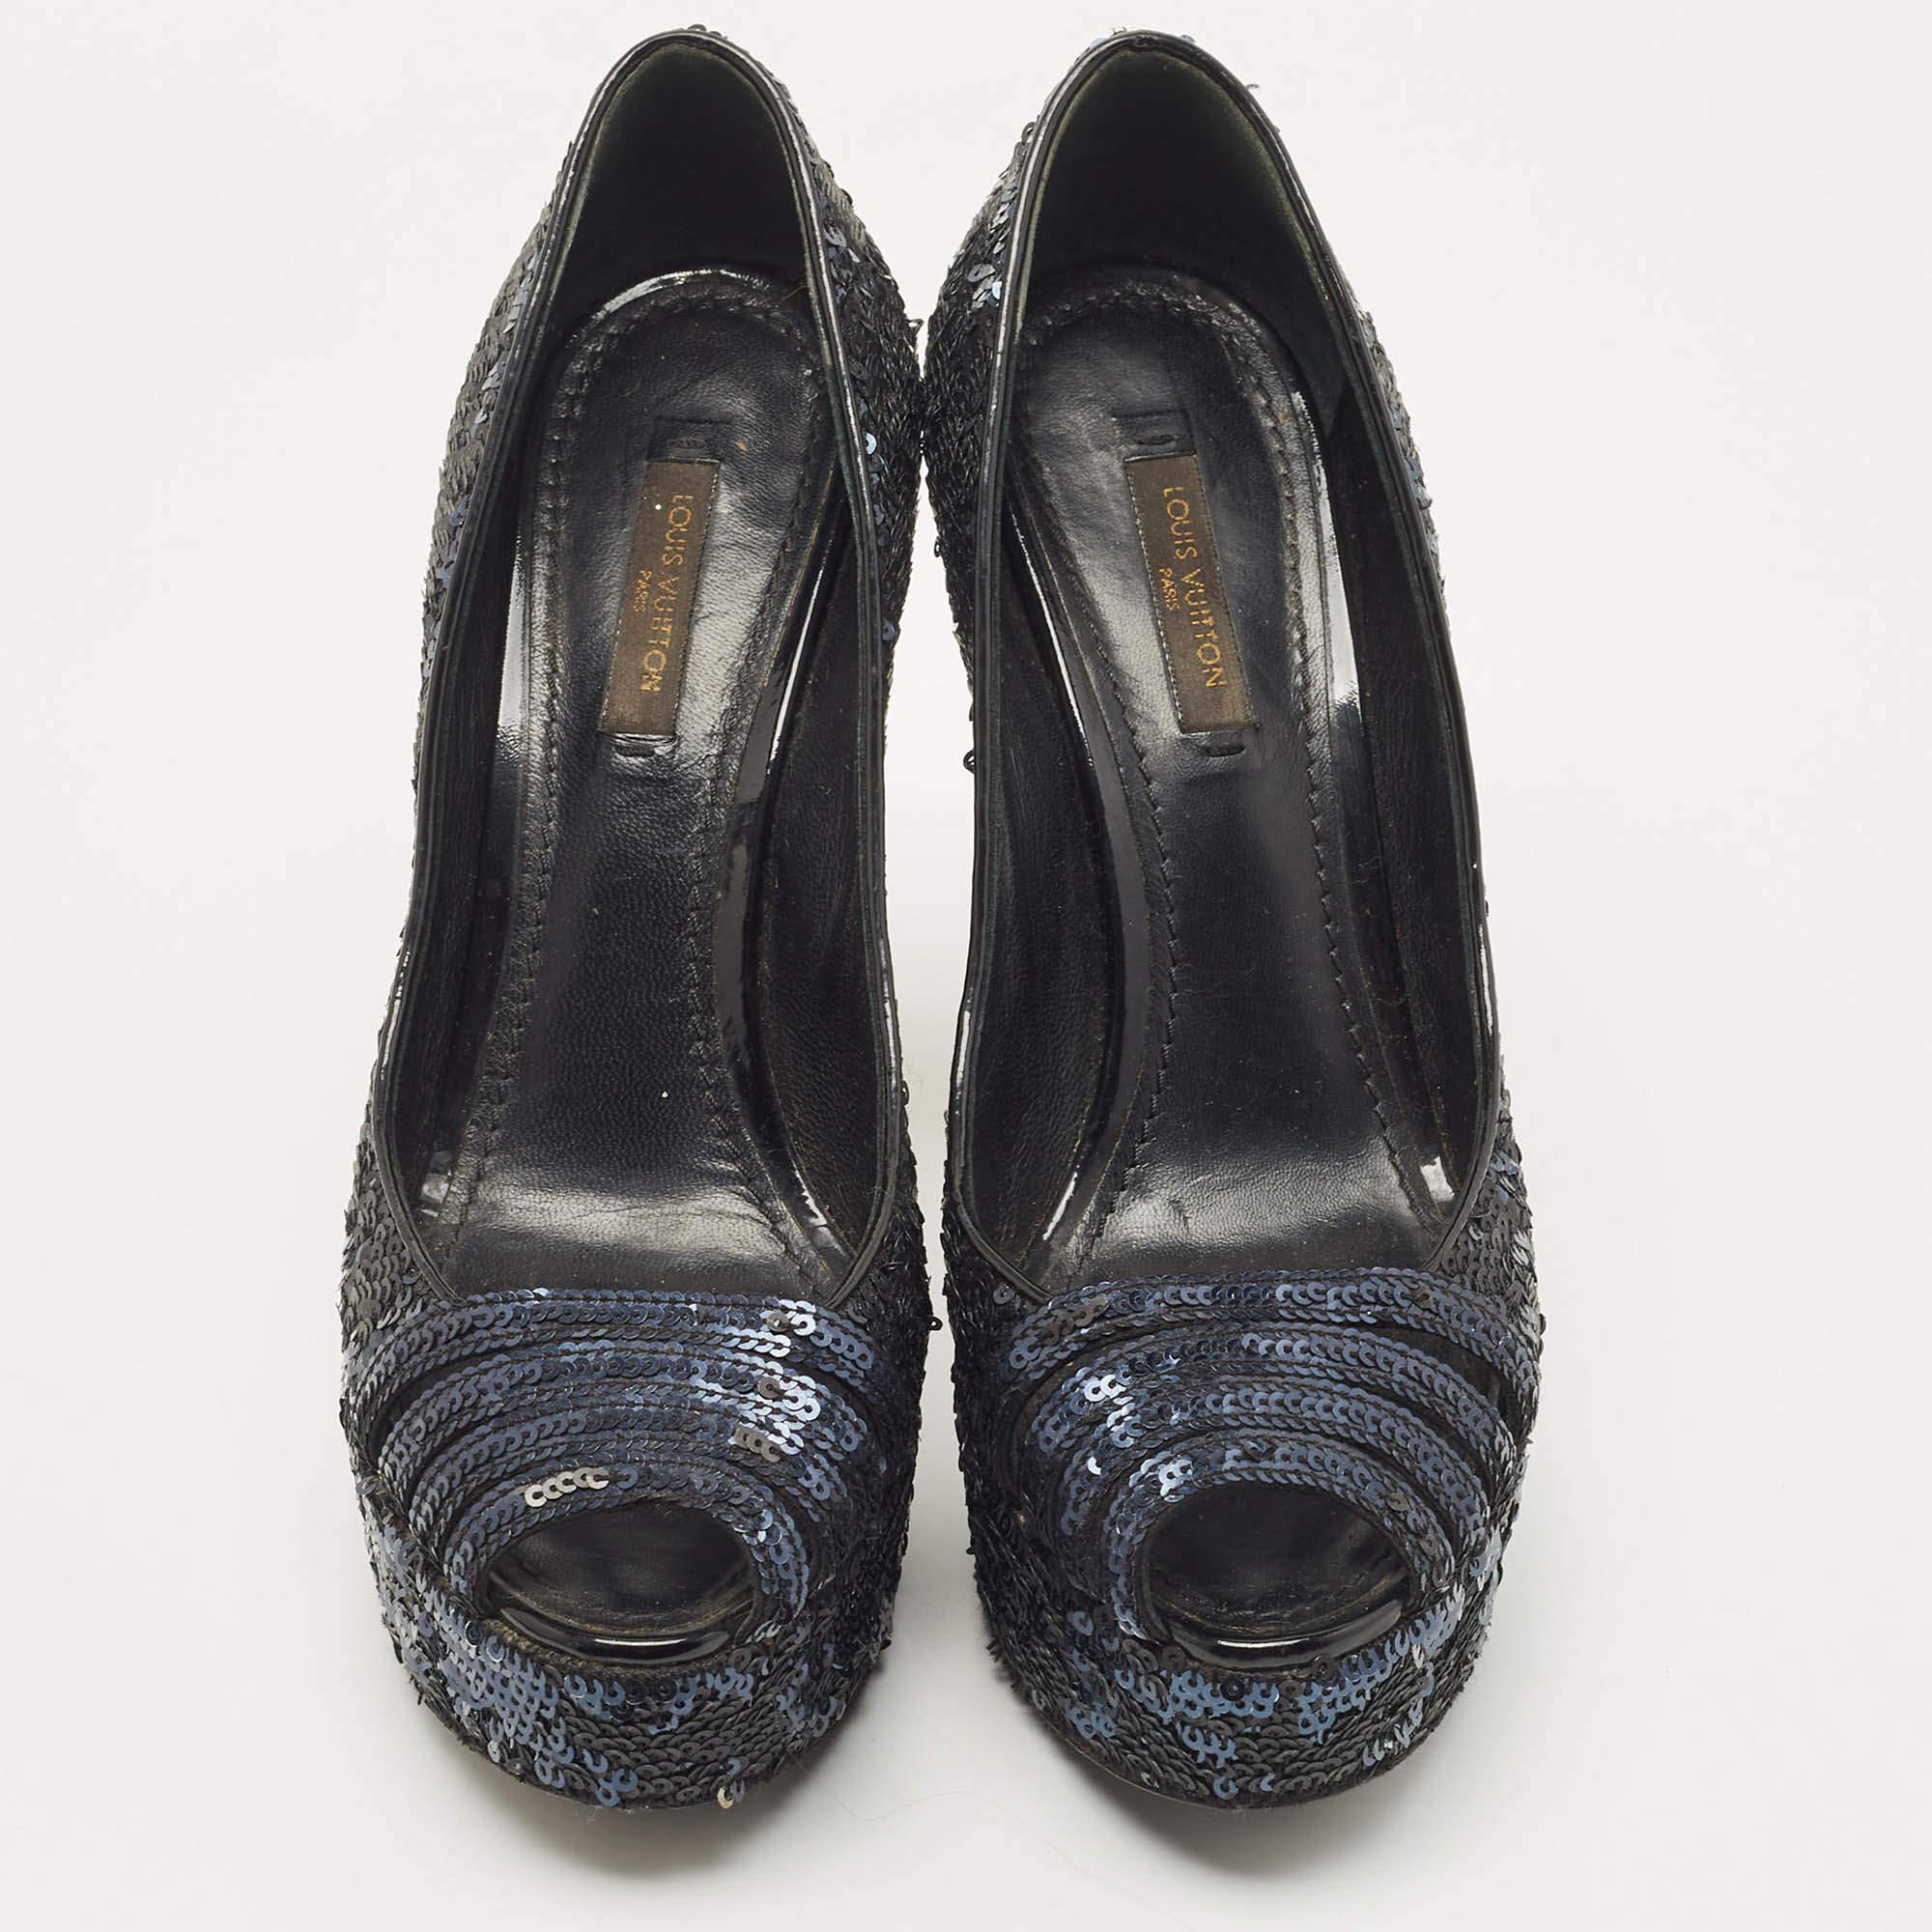 Feel the admiring glances coming your way whenever you sashay out in this pair of gorgeous pumps from Louis Vuitton. They've been embellished with sequins and lined with leather on the insoles. The pumps carry peep toes and are beautifully balanced